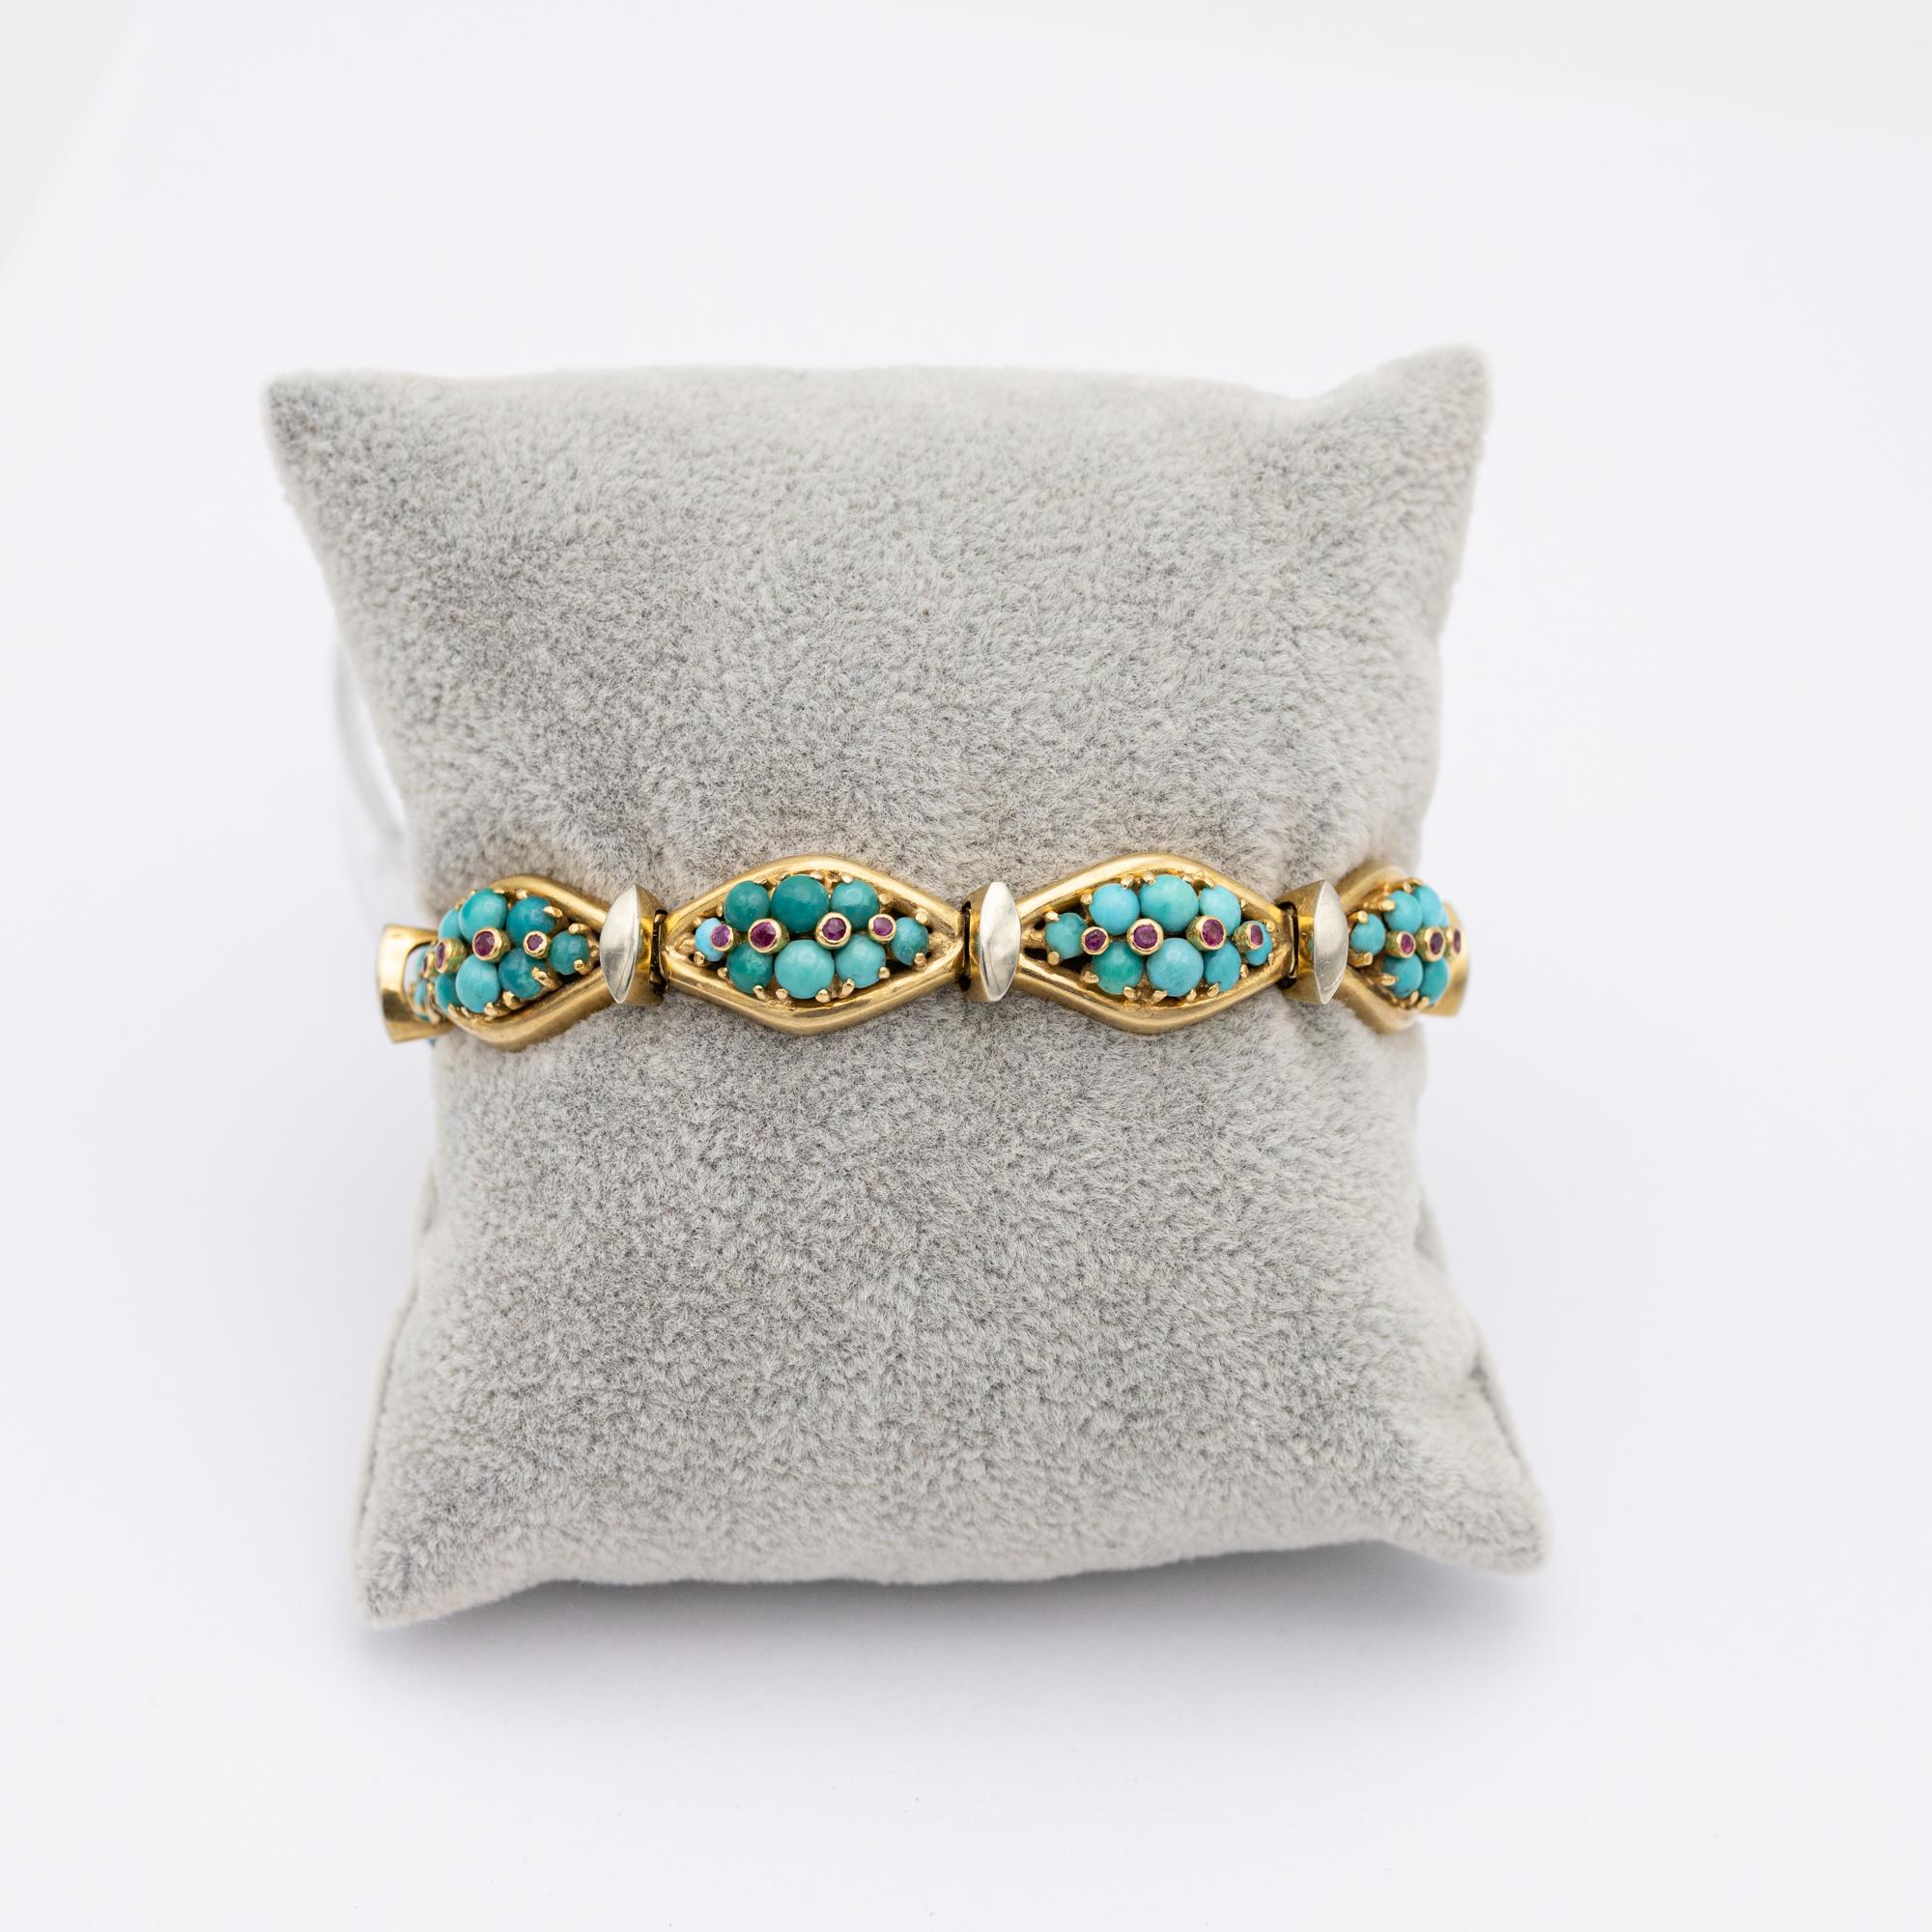 We are happy to introduce you to this wonderful Turquoise bracelet which stole our hearts the moment we laid our eyes on her. This 18 ct yellow gold bracelet is set with all colours of blue & Greenish blue cabochon turquoises. Each link is set with